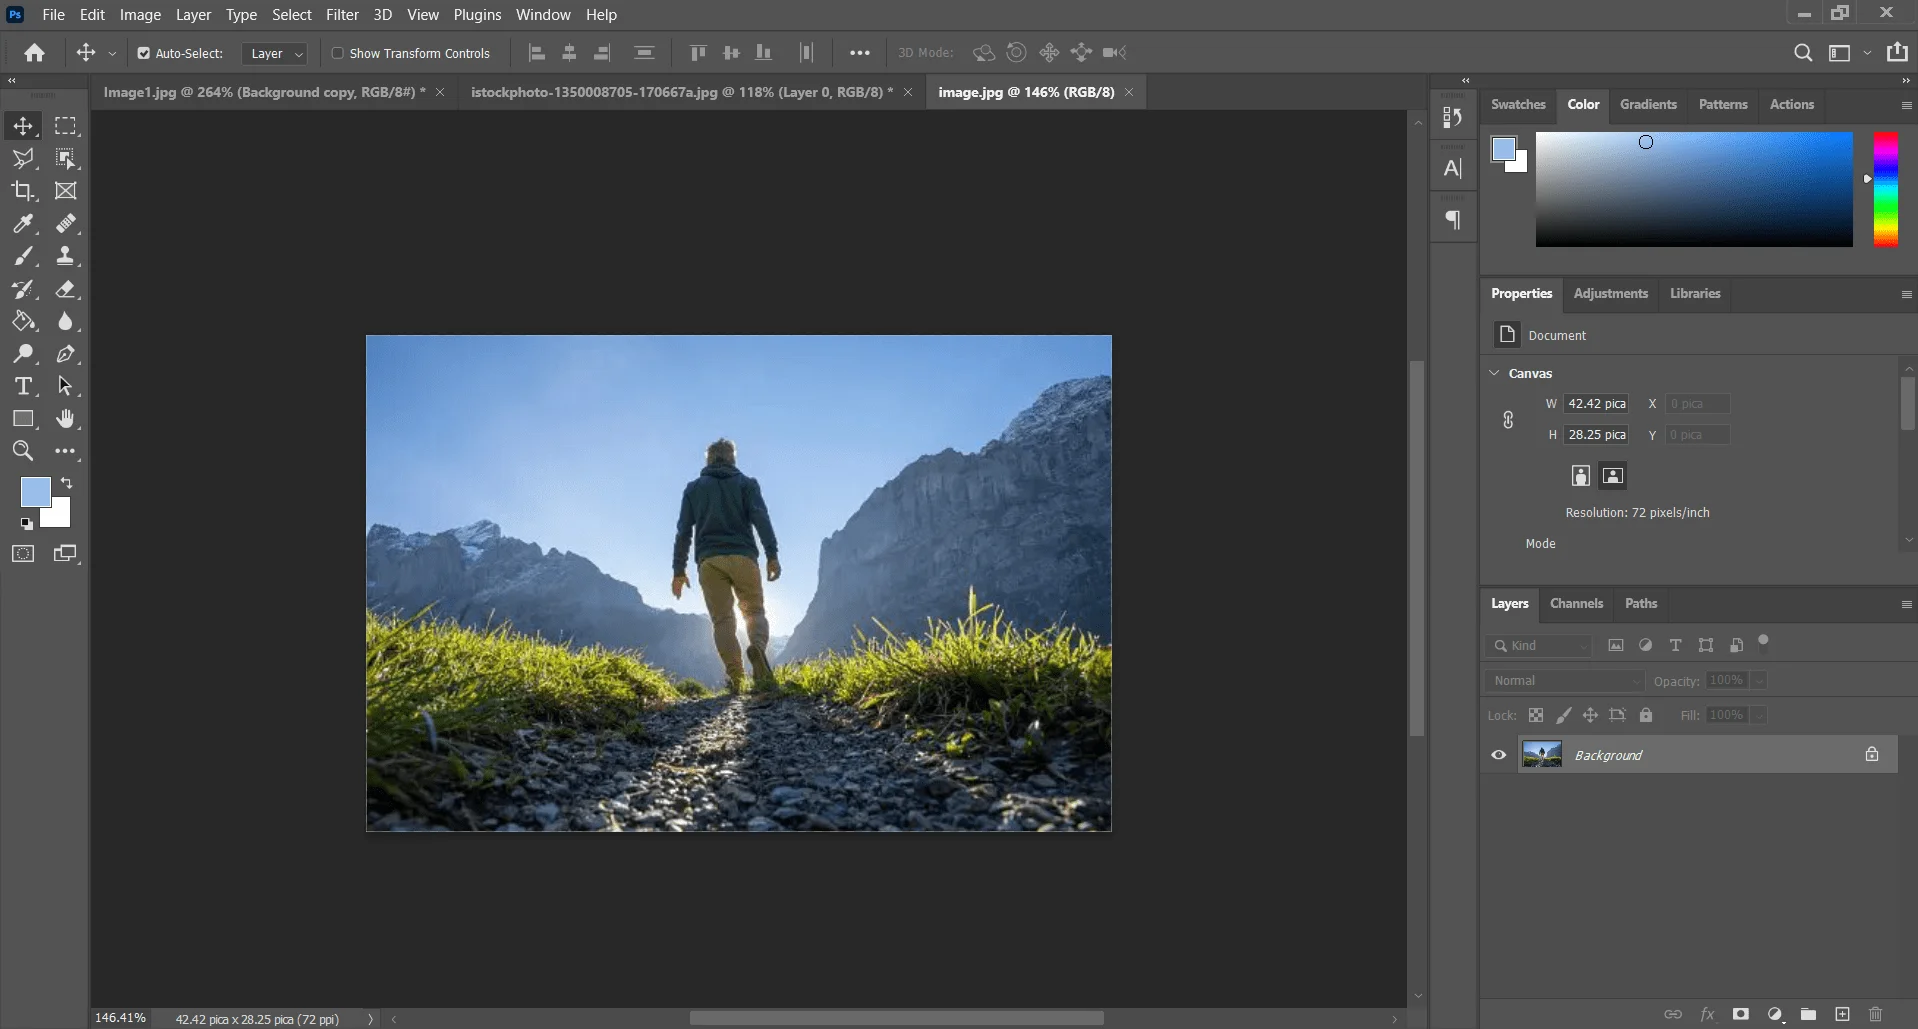 Open Image in Photoshop, Content Aware Fill Photoshop, WikiLearns